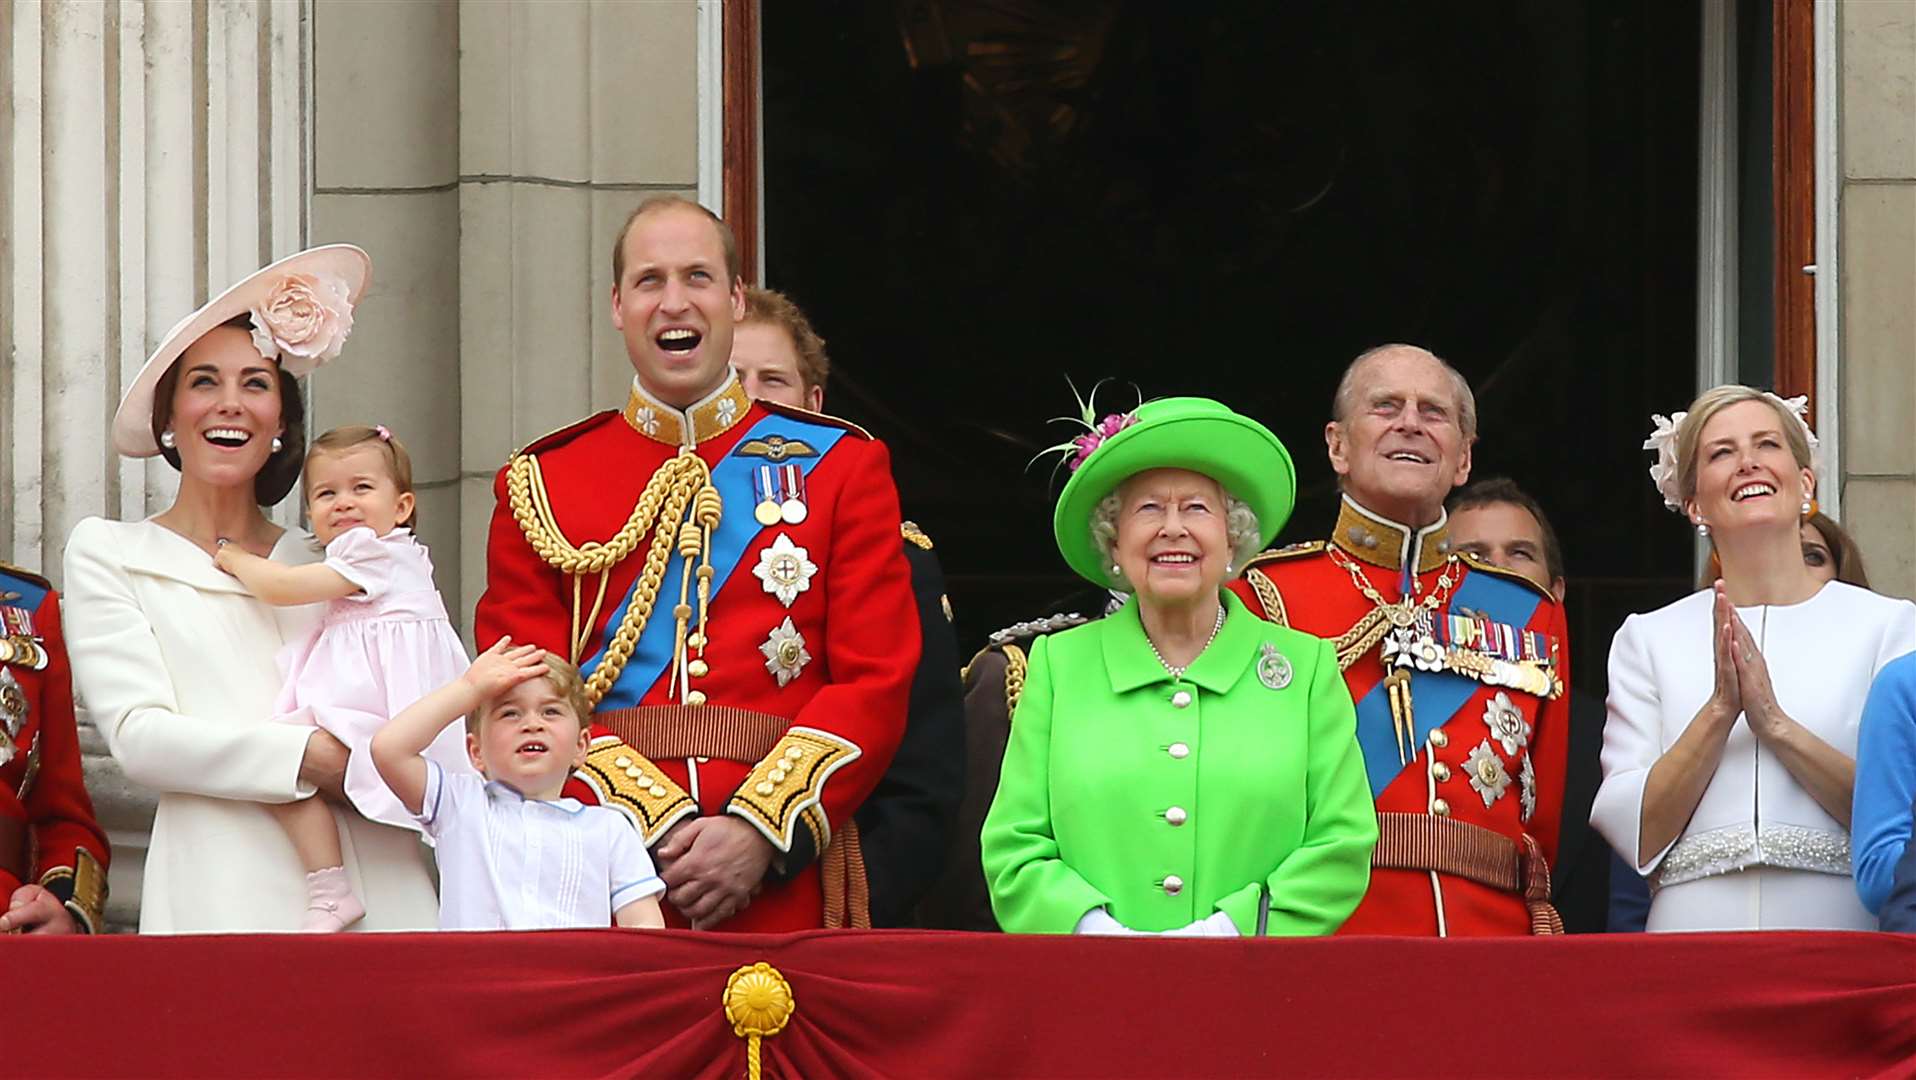 The royals on the balcony after Trooping the Colour (Steve Parsons/PA)